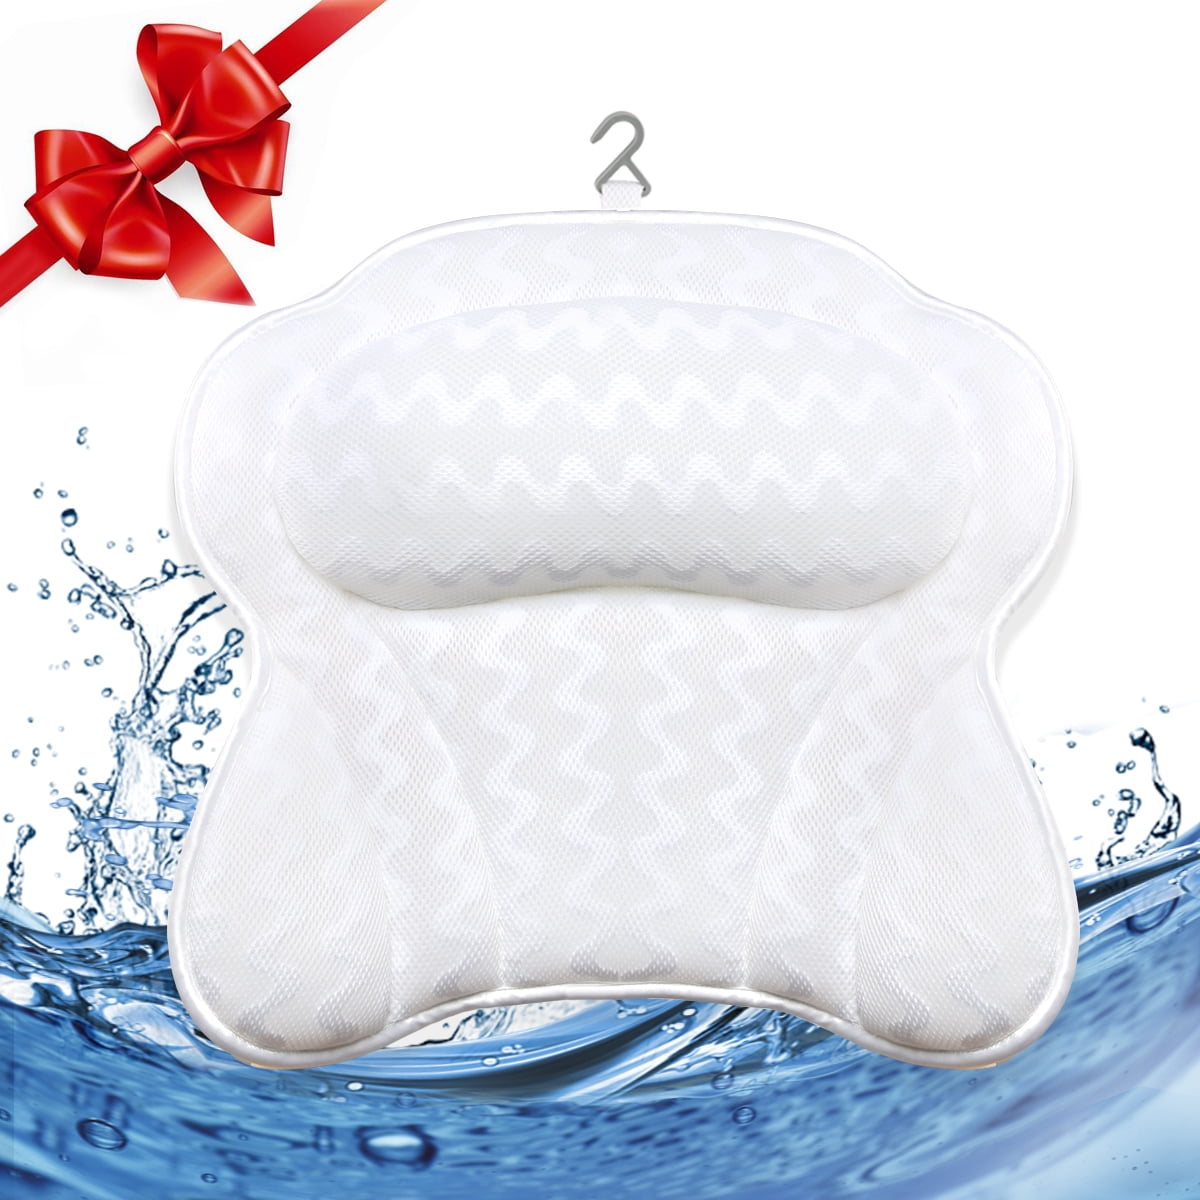  Charmont Luxury Bath Pillow Set, Relaxing Spa Bathtub Headrest  for Head and Neck Support, Slip Resistant Waterproof Bathtub Cushion Strong  Suction for Soaking Tub 3D Air Mesh with Accessories : Beauty